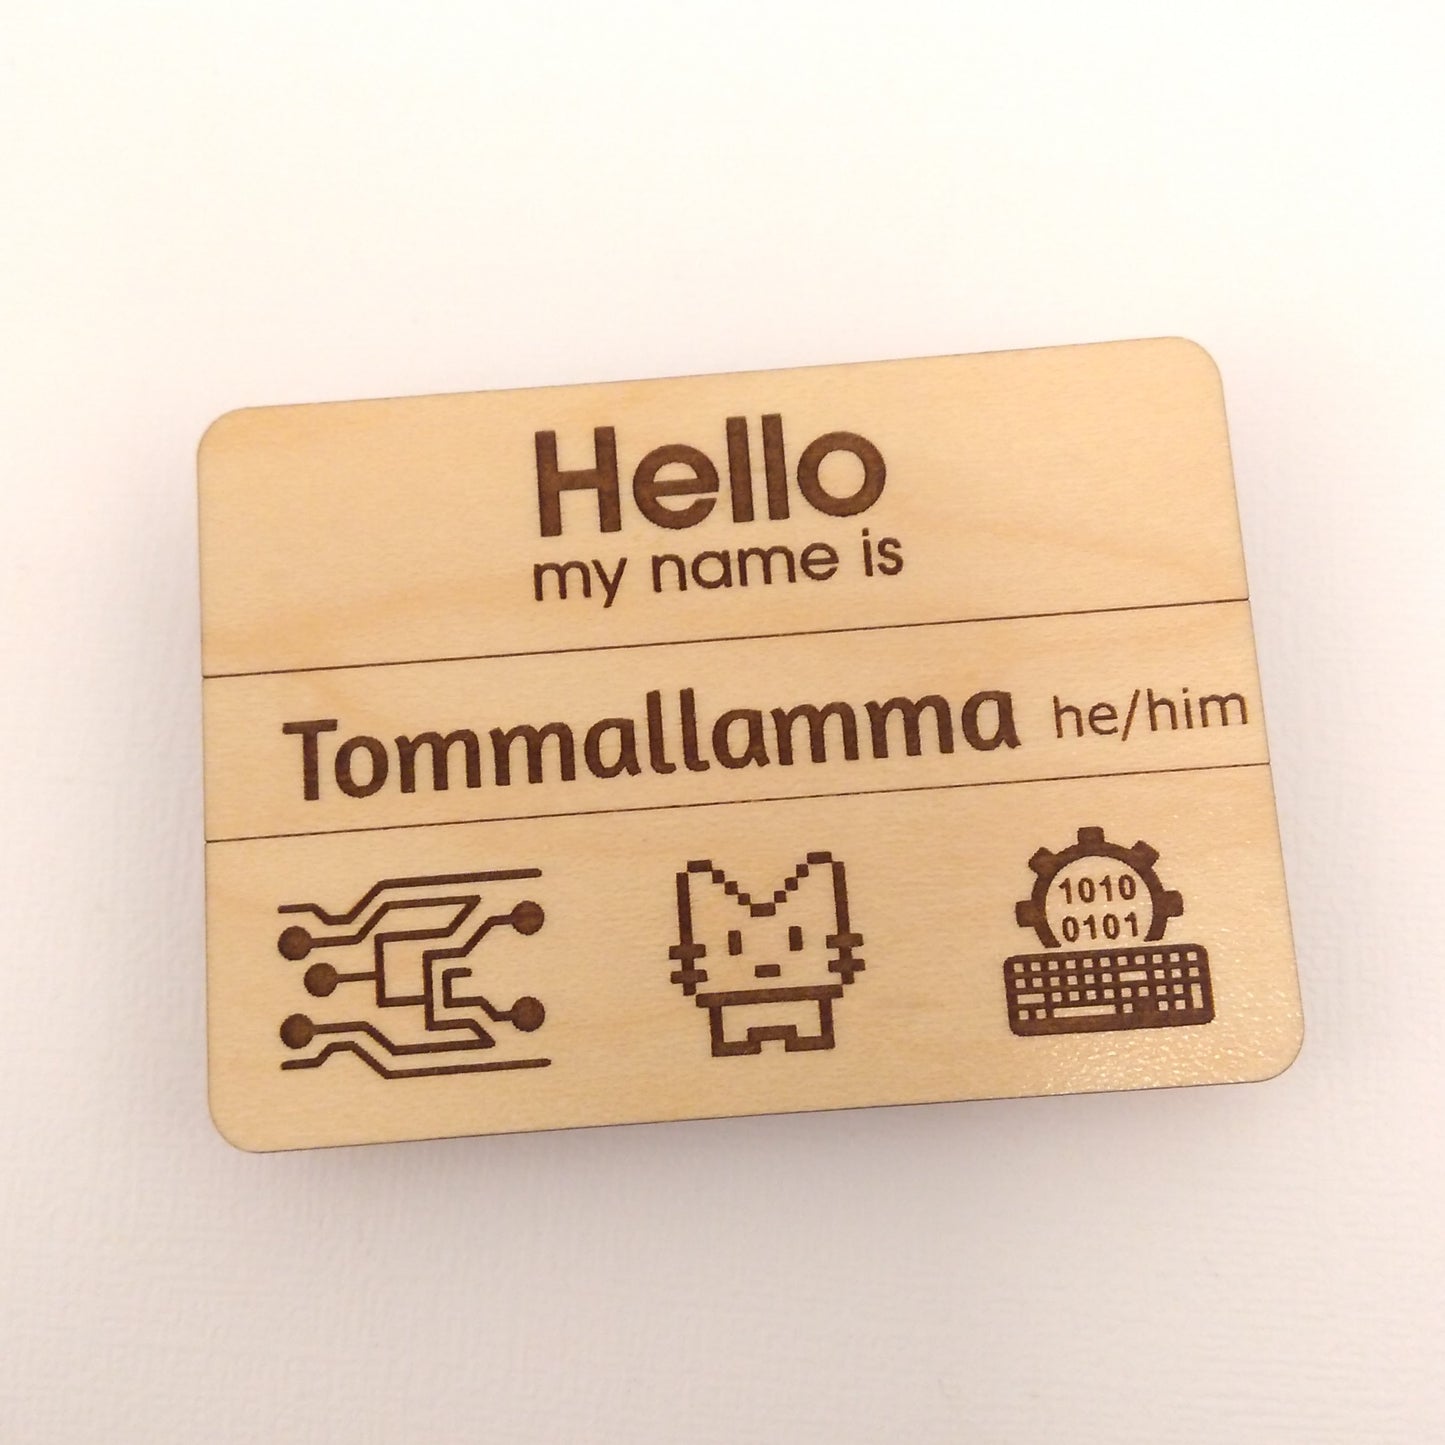 Personalized Hello Name Badge